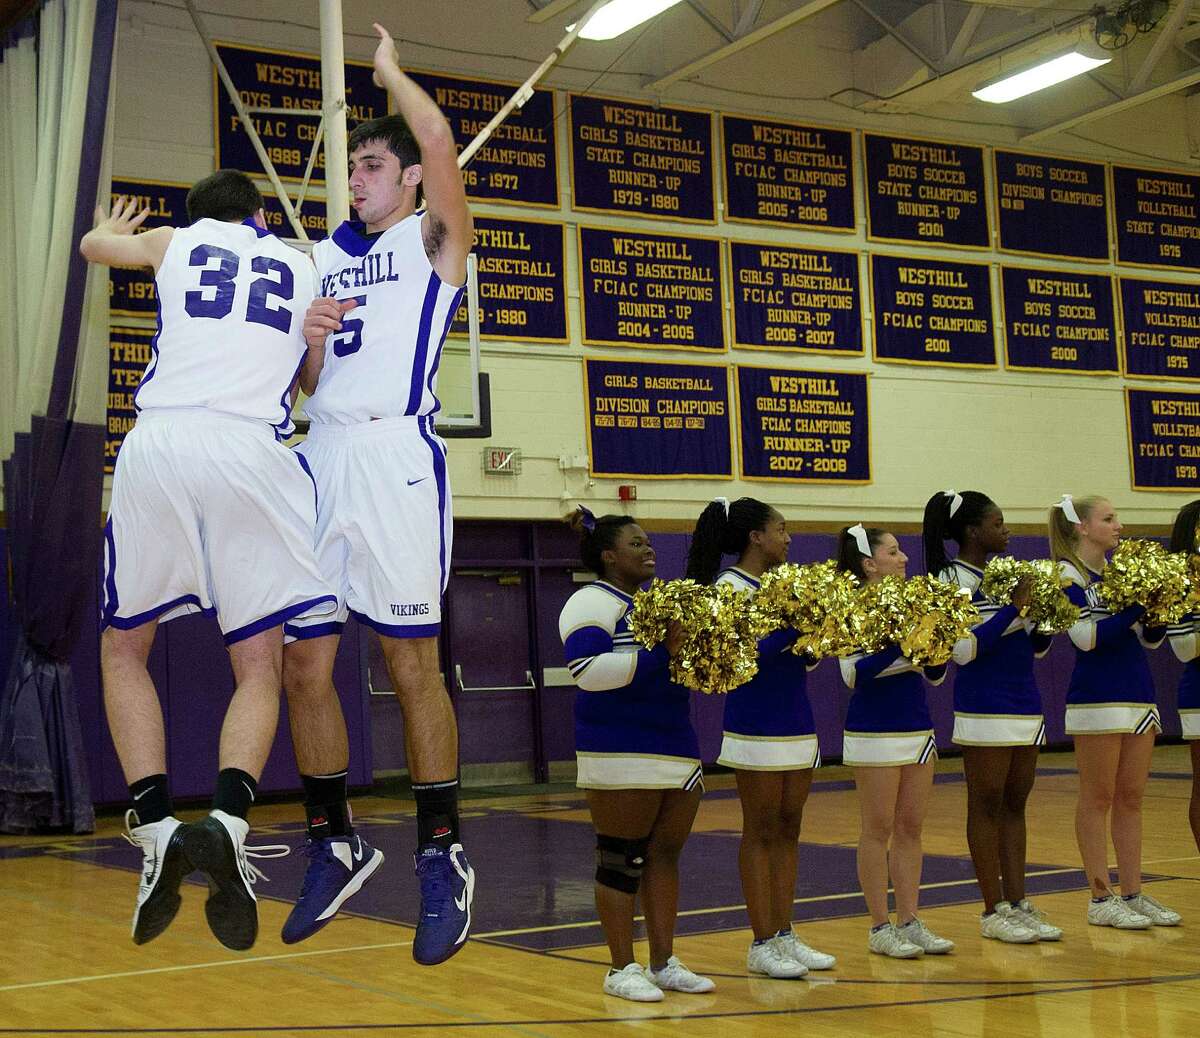 Friday's basketball game between Westhill and Ridgefield in Stamford, Conn., on December 20, 2013.